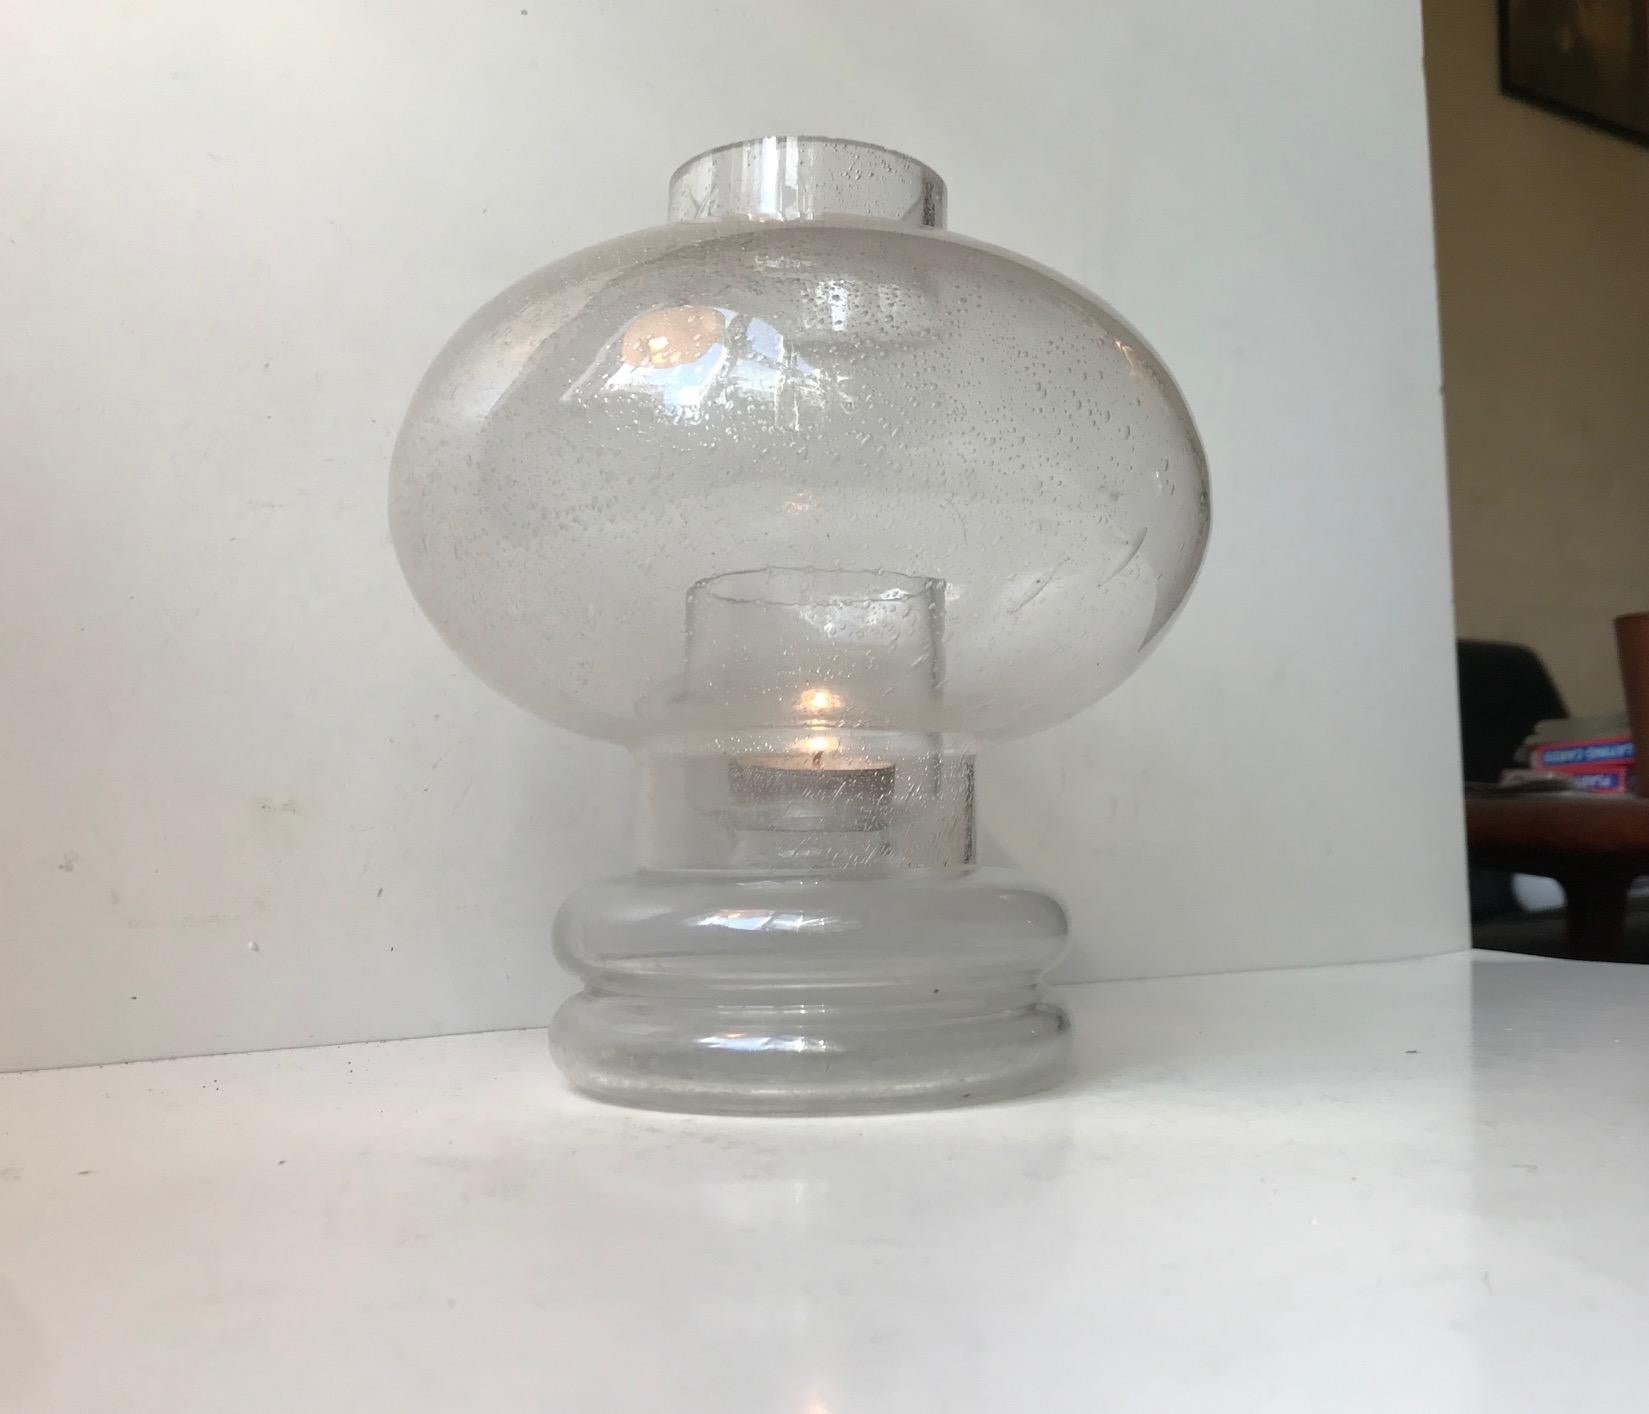 Spacey looking candle table lamp for tea light, bloc or ball candles. It has a base of clear hand blown glass and a shade of clear blister glass. Designed by Nanny Still during the late 1960s and manufactured by Rihiimäen Last Oy in Finland, circa